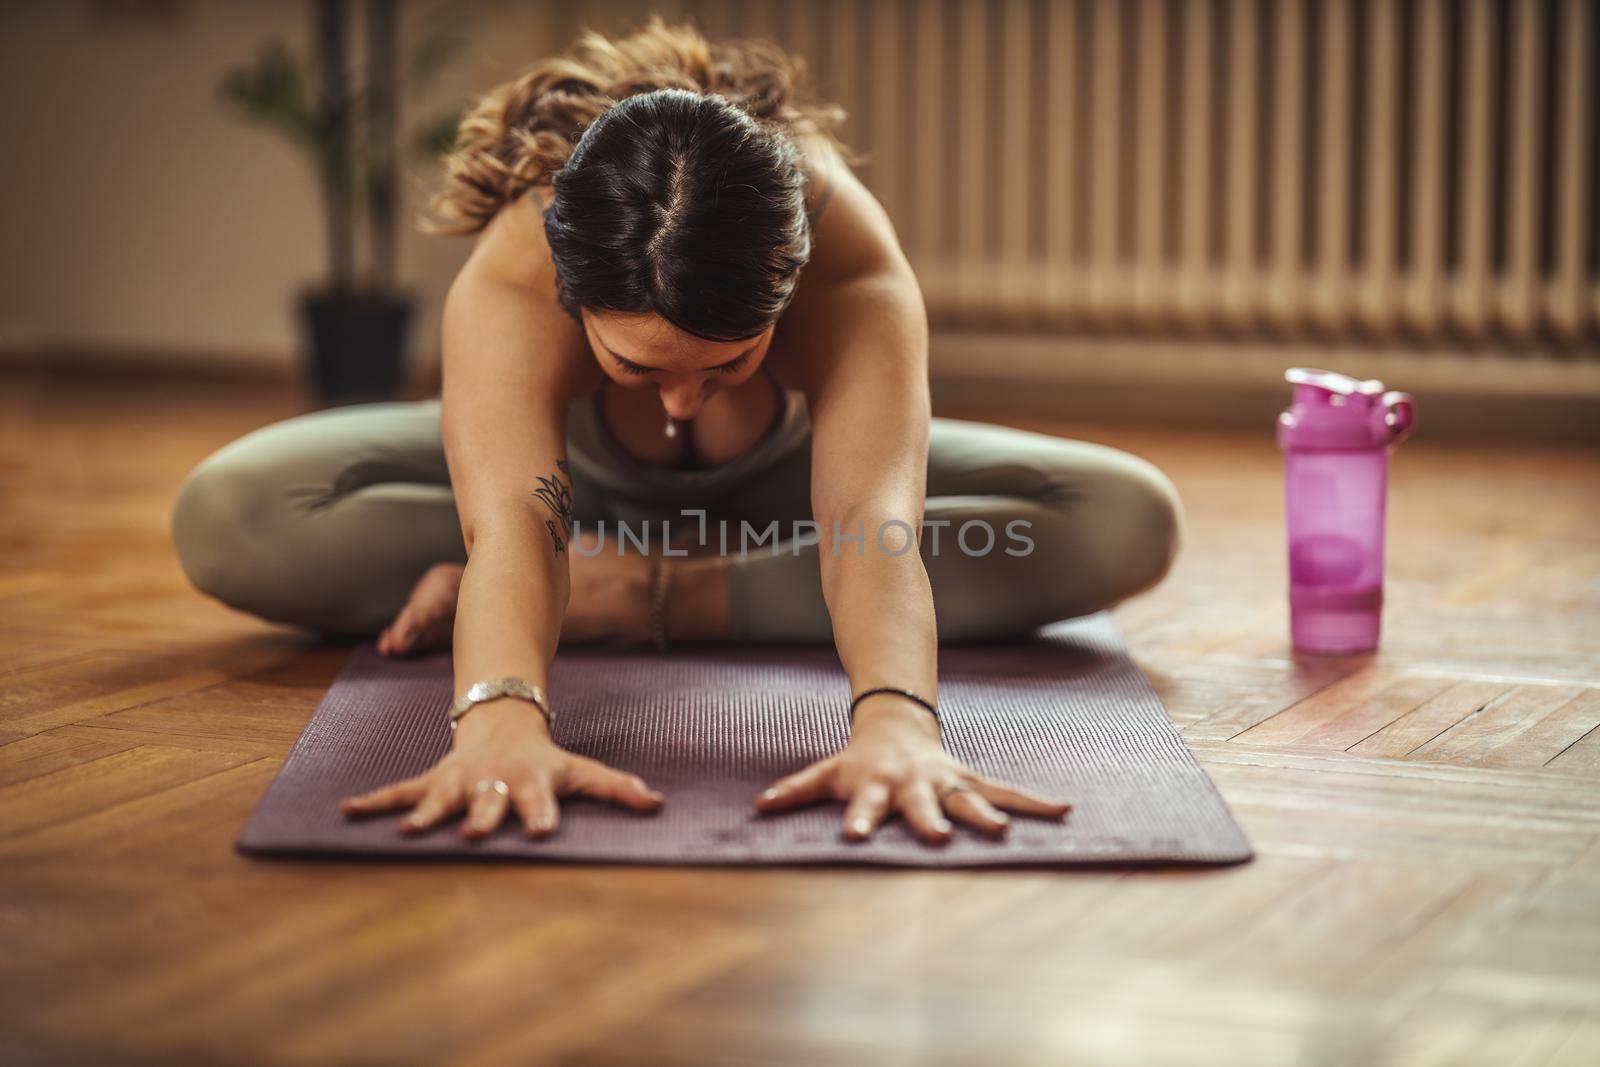 Young woman is doing yoga meditation during coronavirus pandemic in the living room at home. She is meditating on floor mat in morning sunshine.